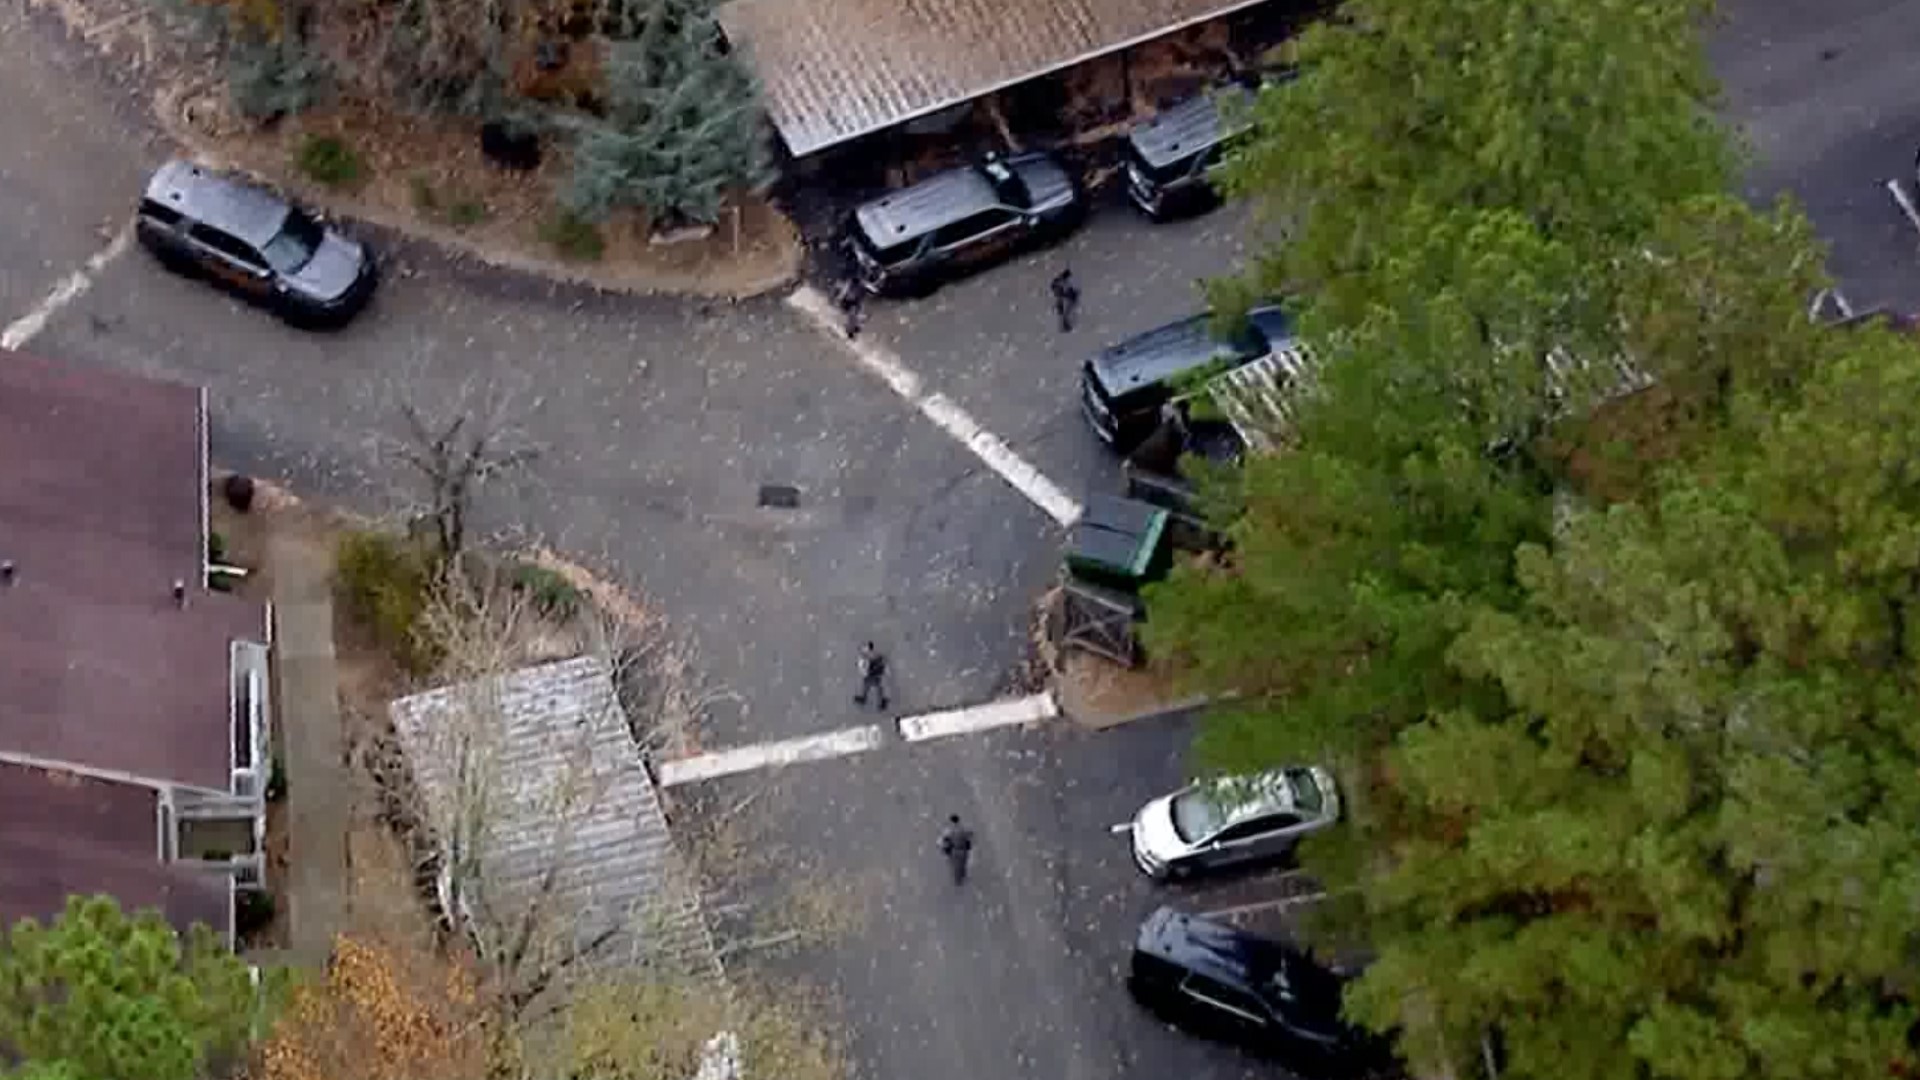 11Alive SkyTracker flew over the scene where the suspect appeared to have been taken into custody at the Forest Ridge on Terrell Mill Apartments.